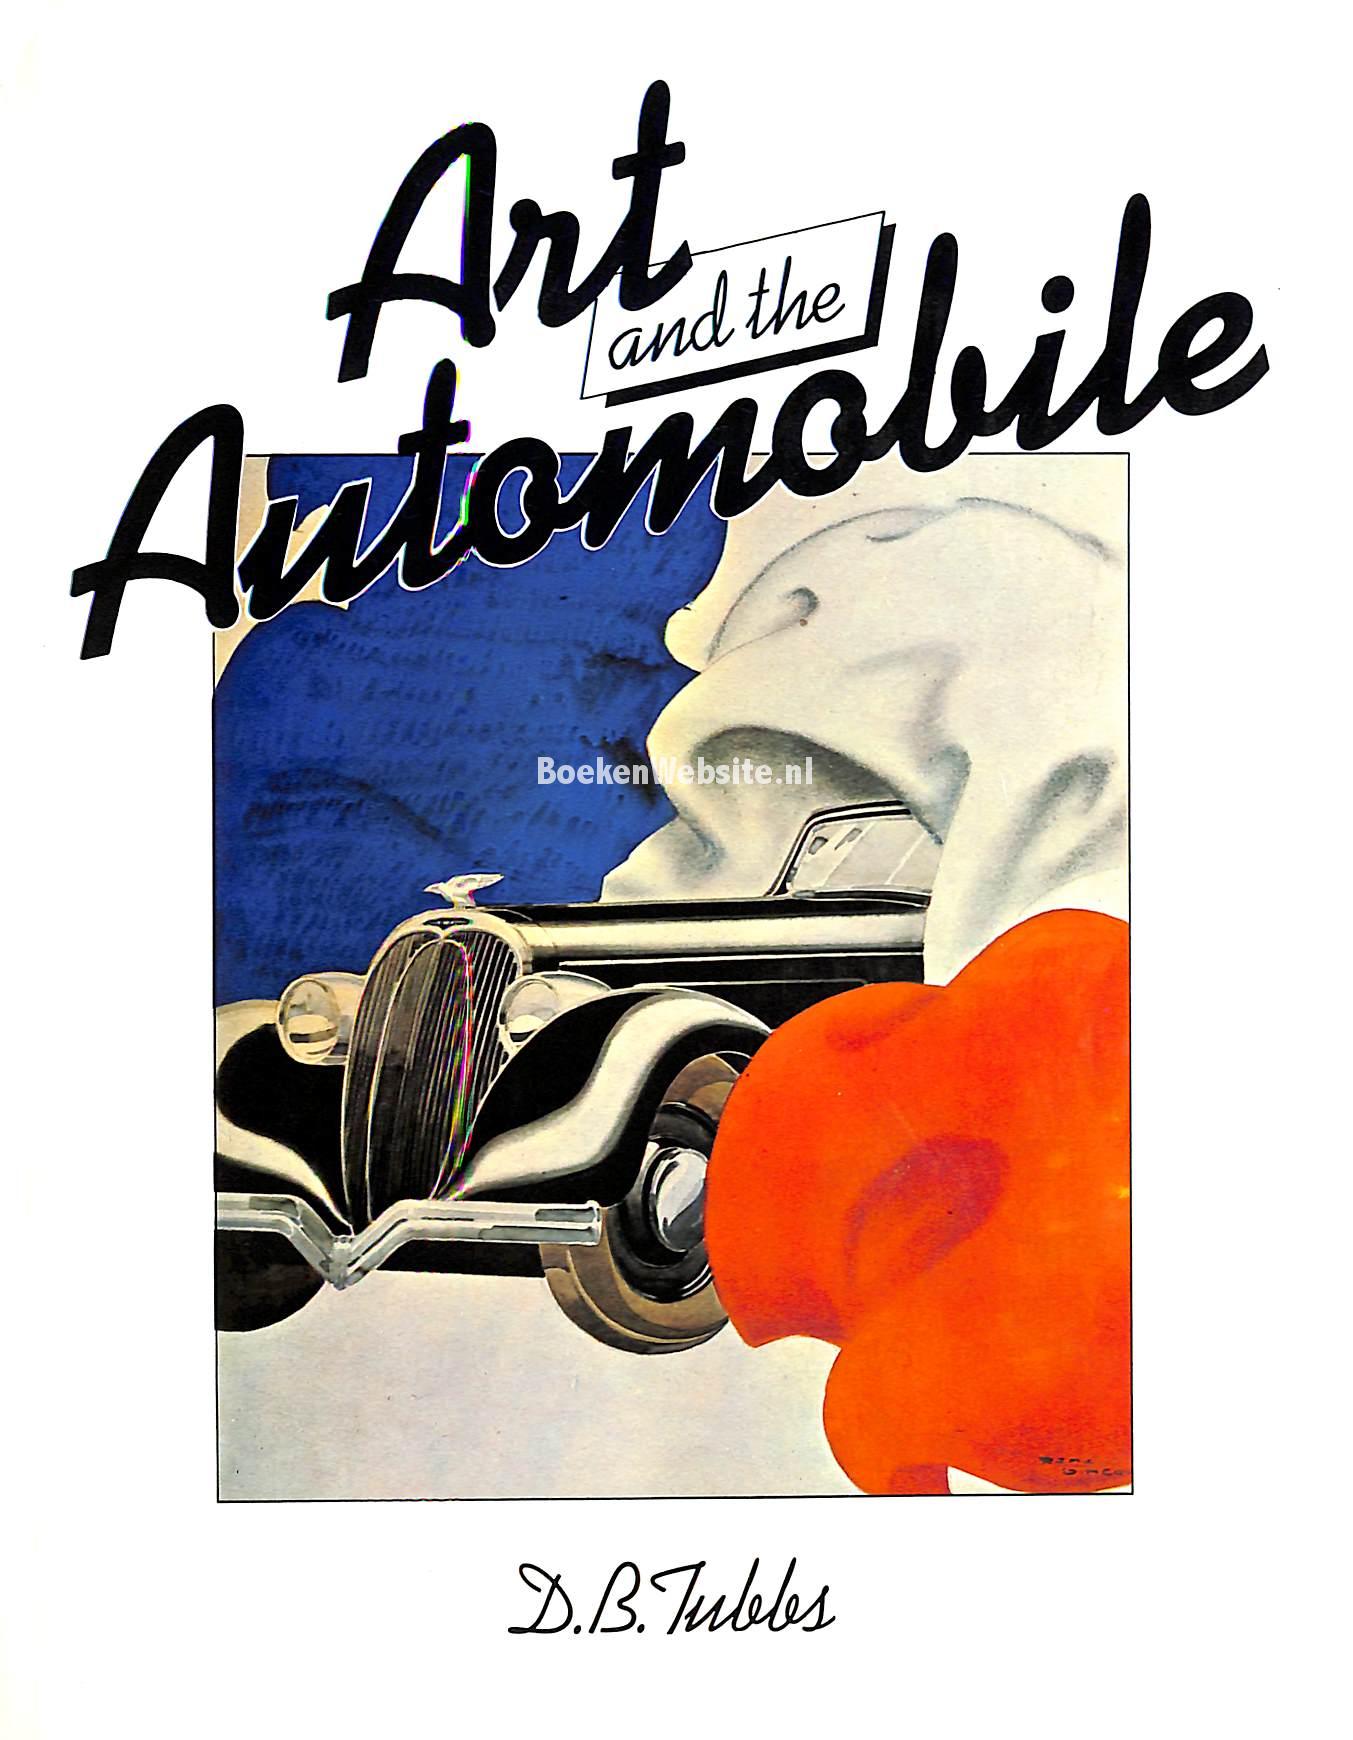 Art and the Automobile